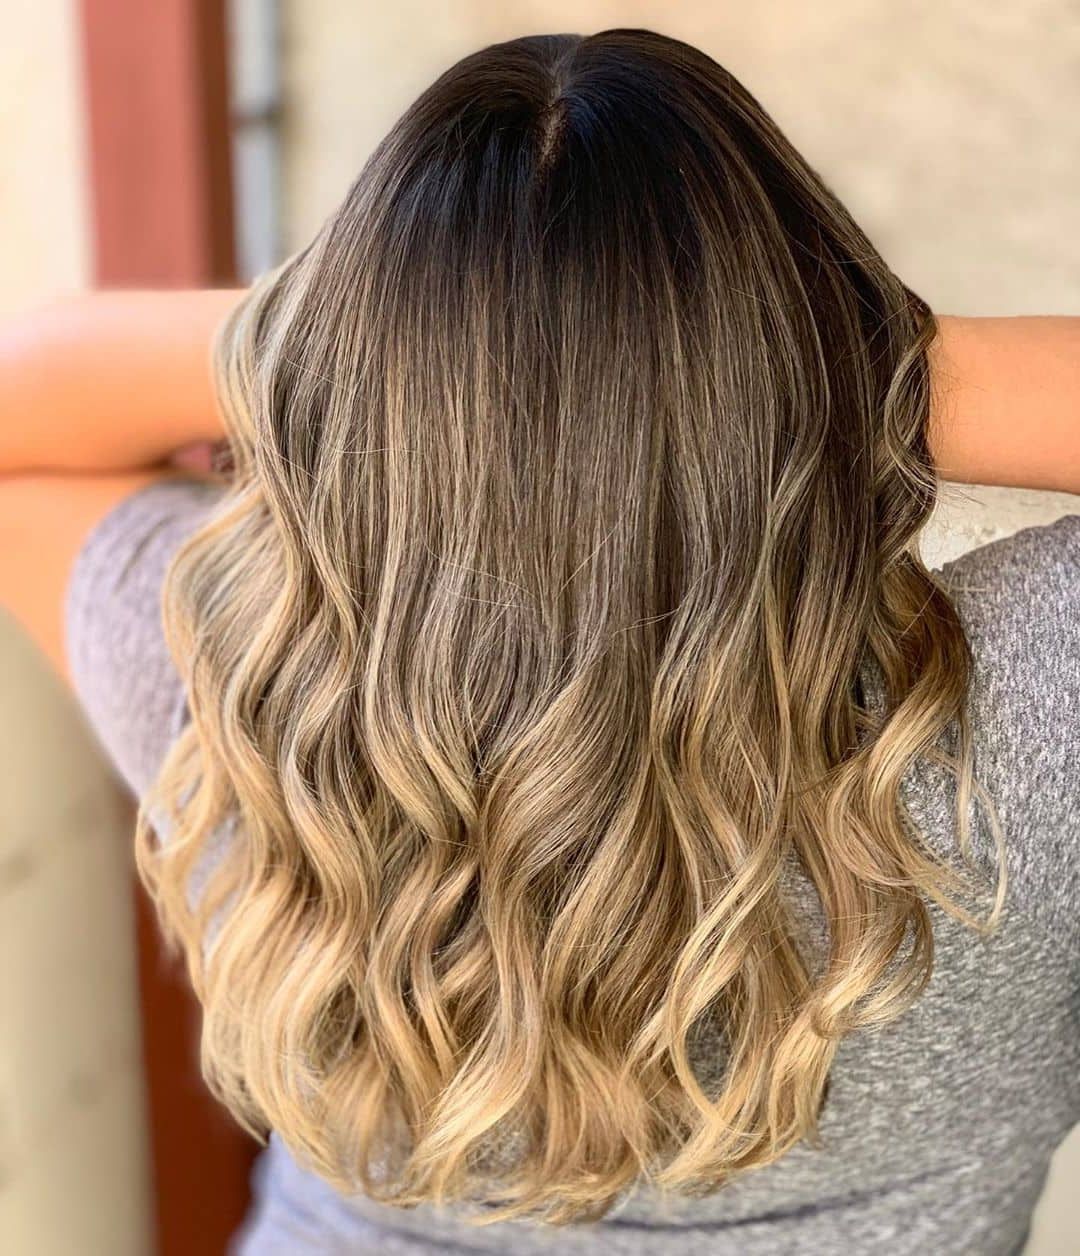 23 Gorgeous Medium Wavy Hairstyles – Stylesrant Within Most Current Waves Haircuts With Blonde Ombre (View 9 of 25)